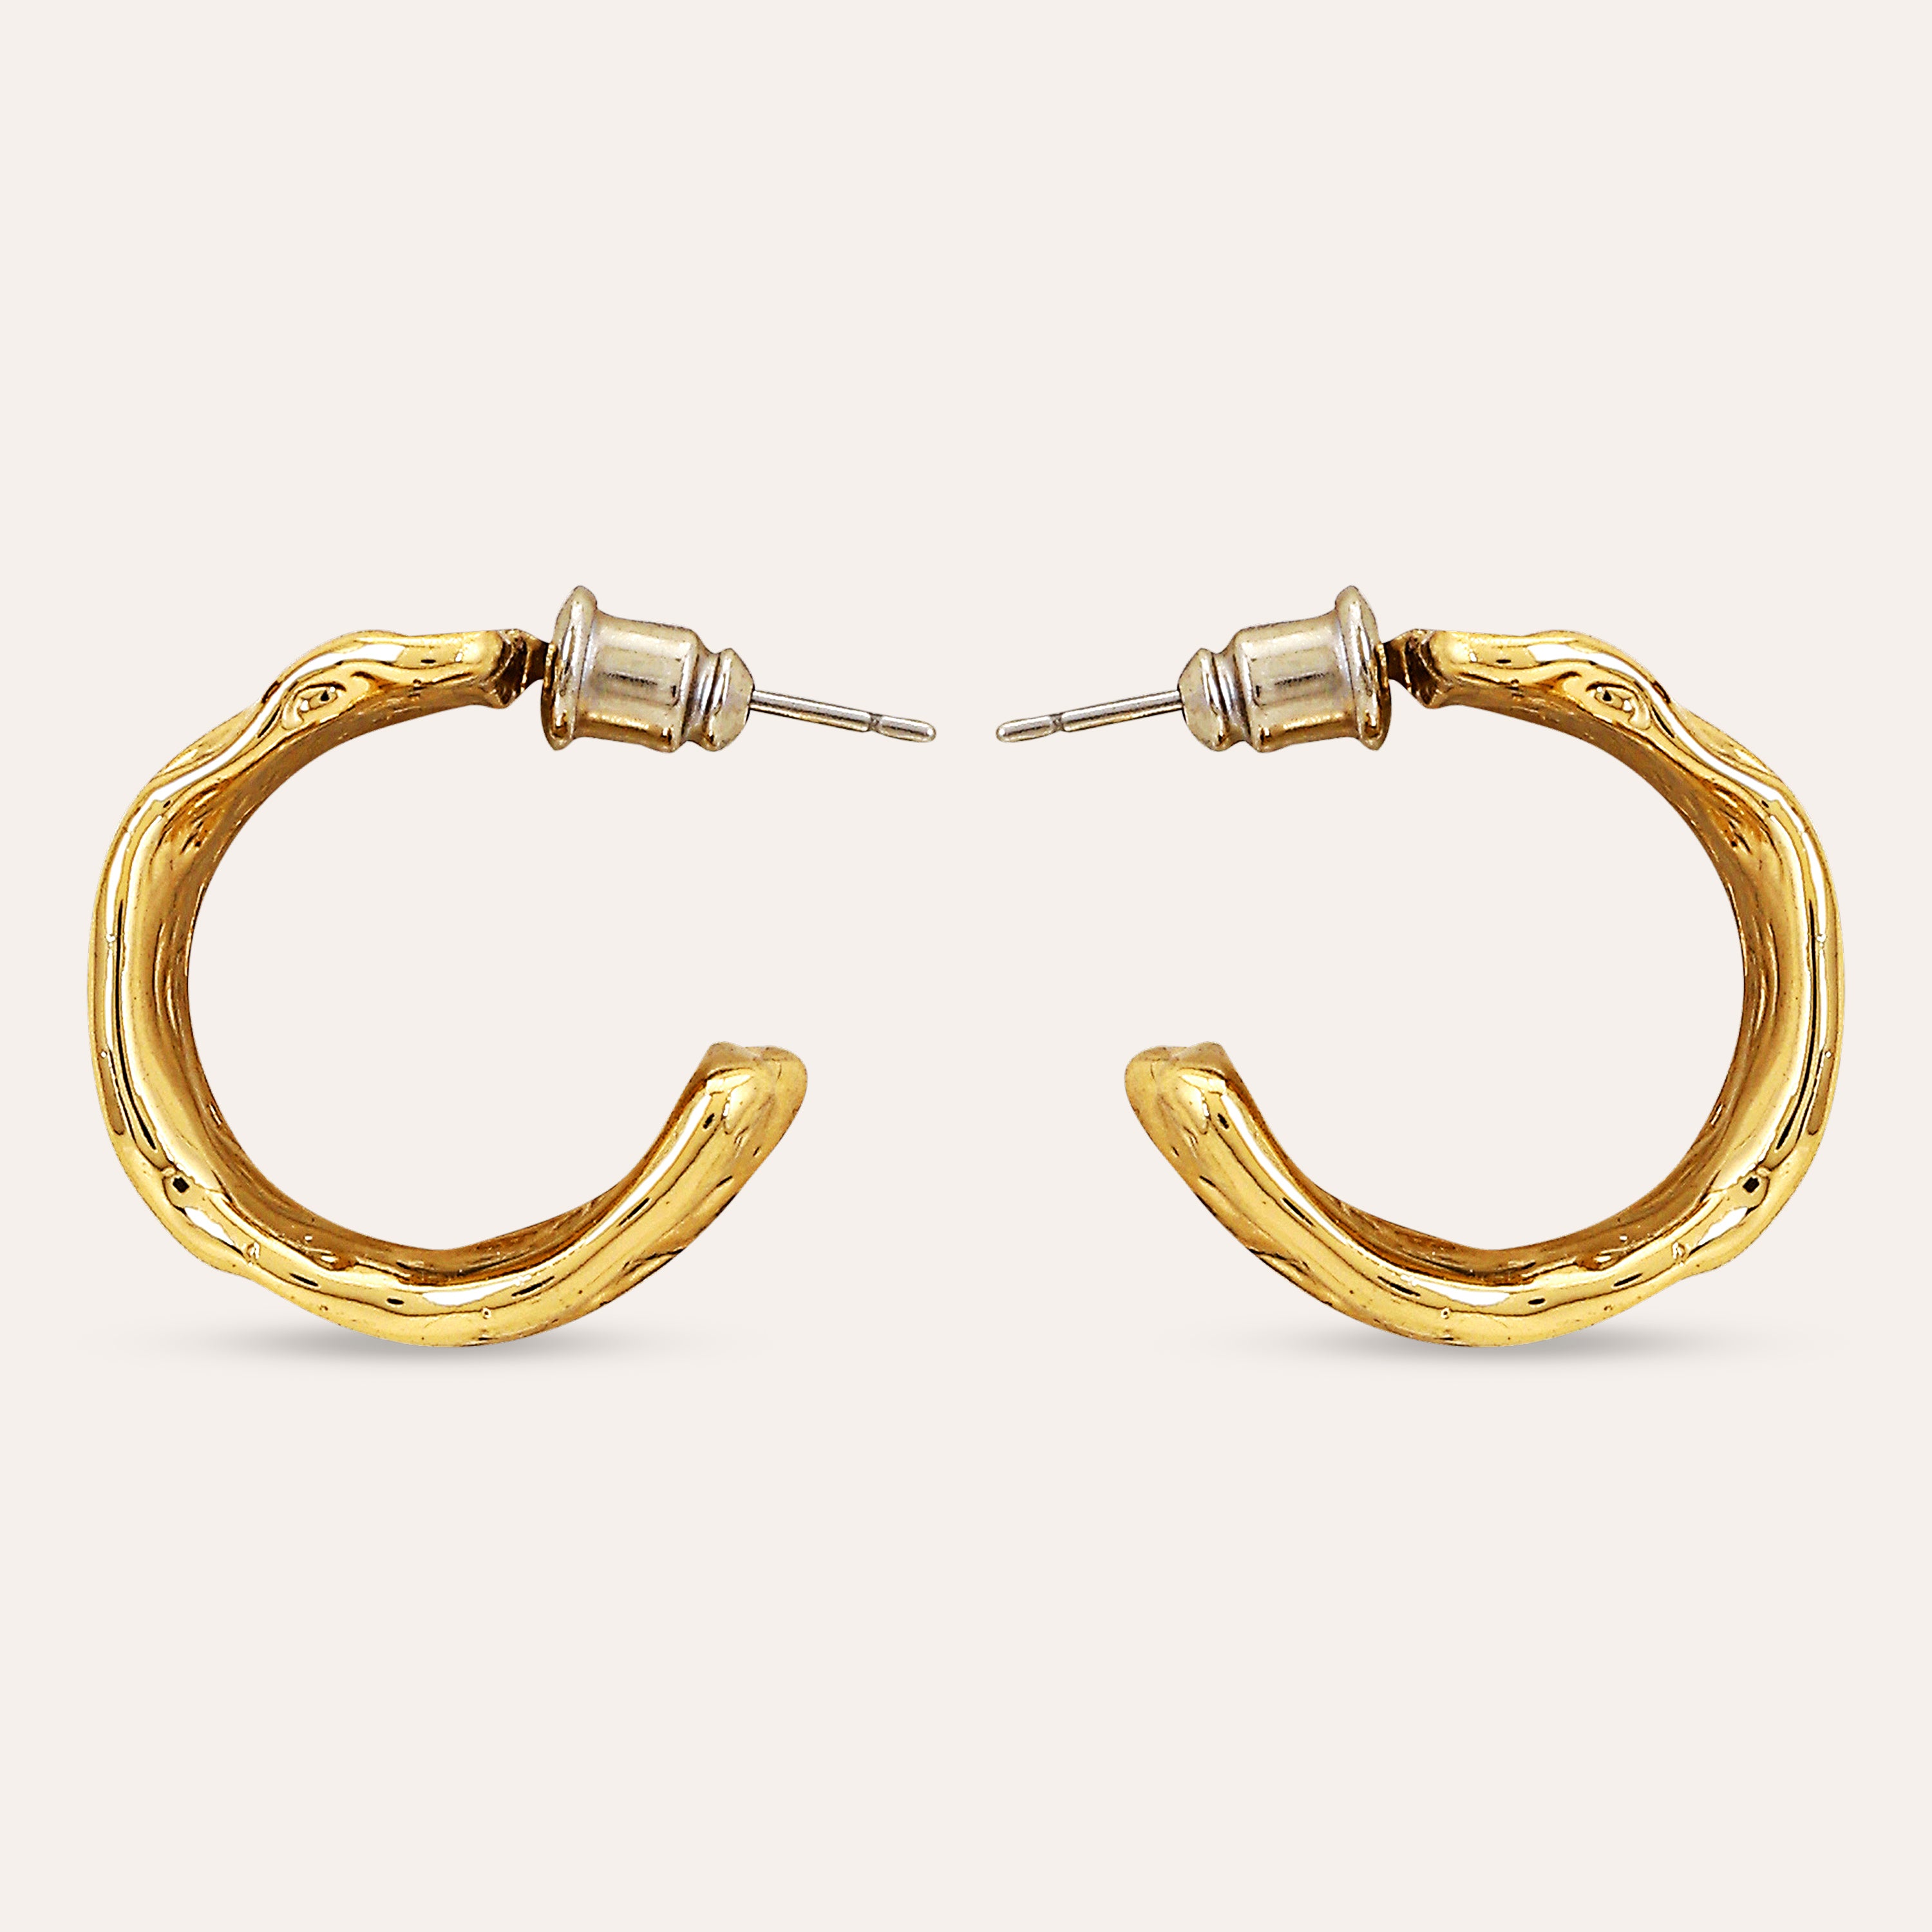 TFC Italian Luxury Gold Plated Hoop Earrings- Discover daily wear gold earrings including stud earrings, hoop earrings, and pearl earrings, perfect as earrings for women and earrings for girls.Find the cheapest fashion jewellery which is anti-tarnis​h only at The Fun company.